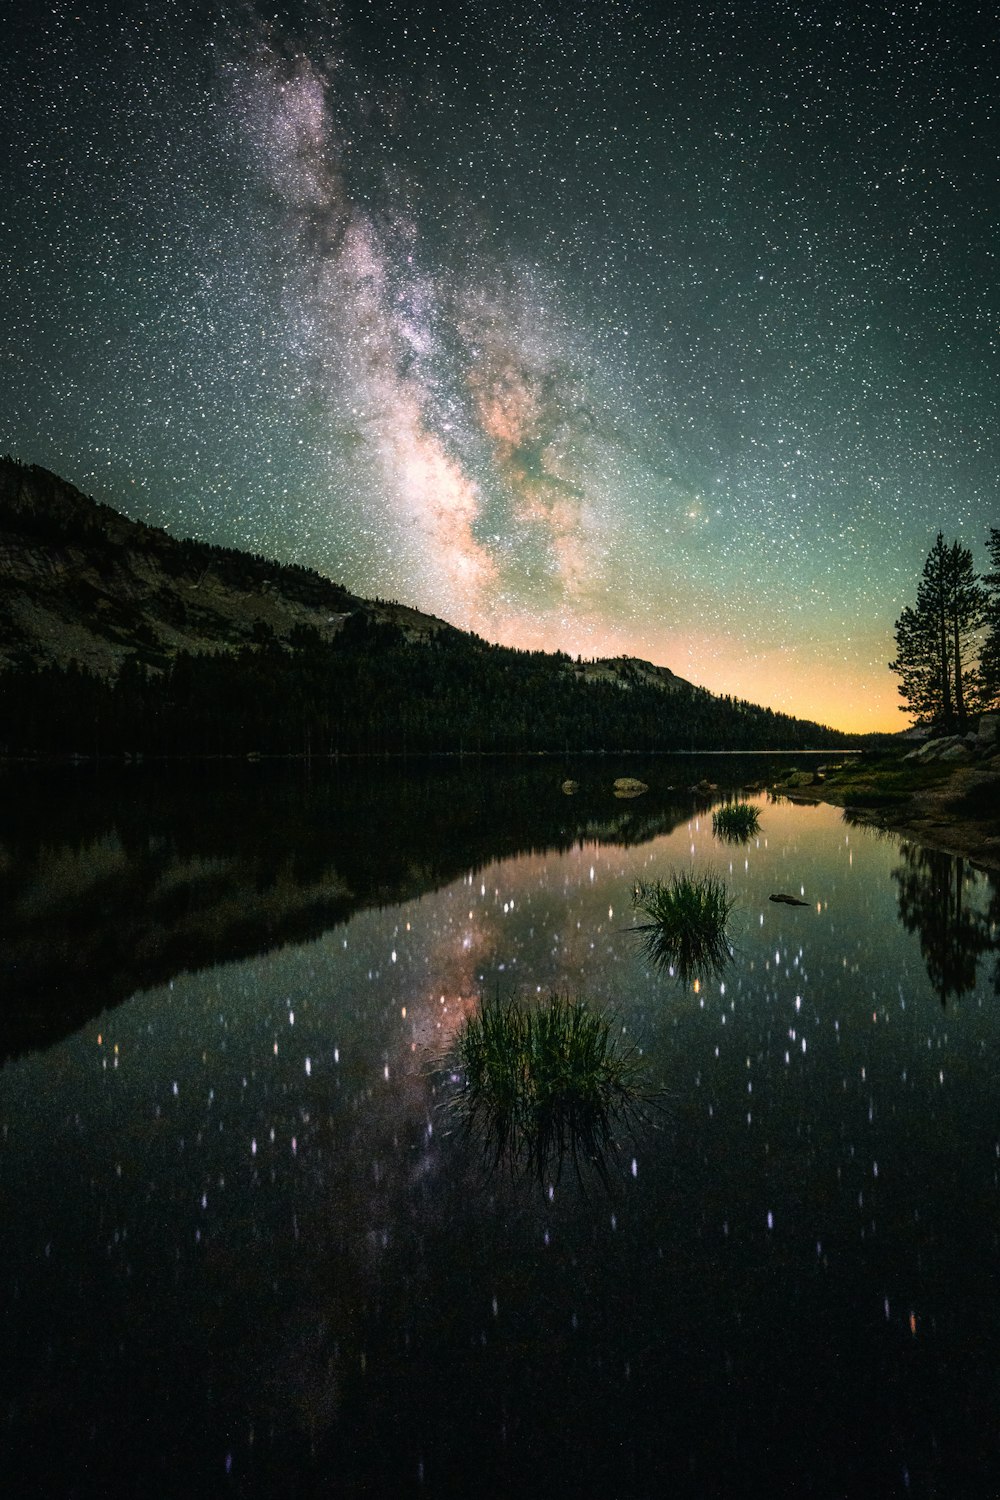 green trees near lake under blue sky with stars during night time